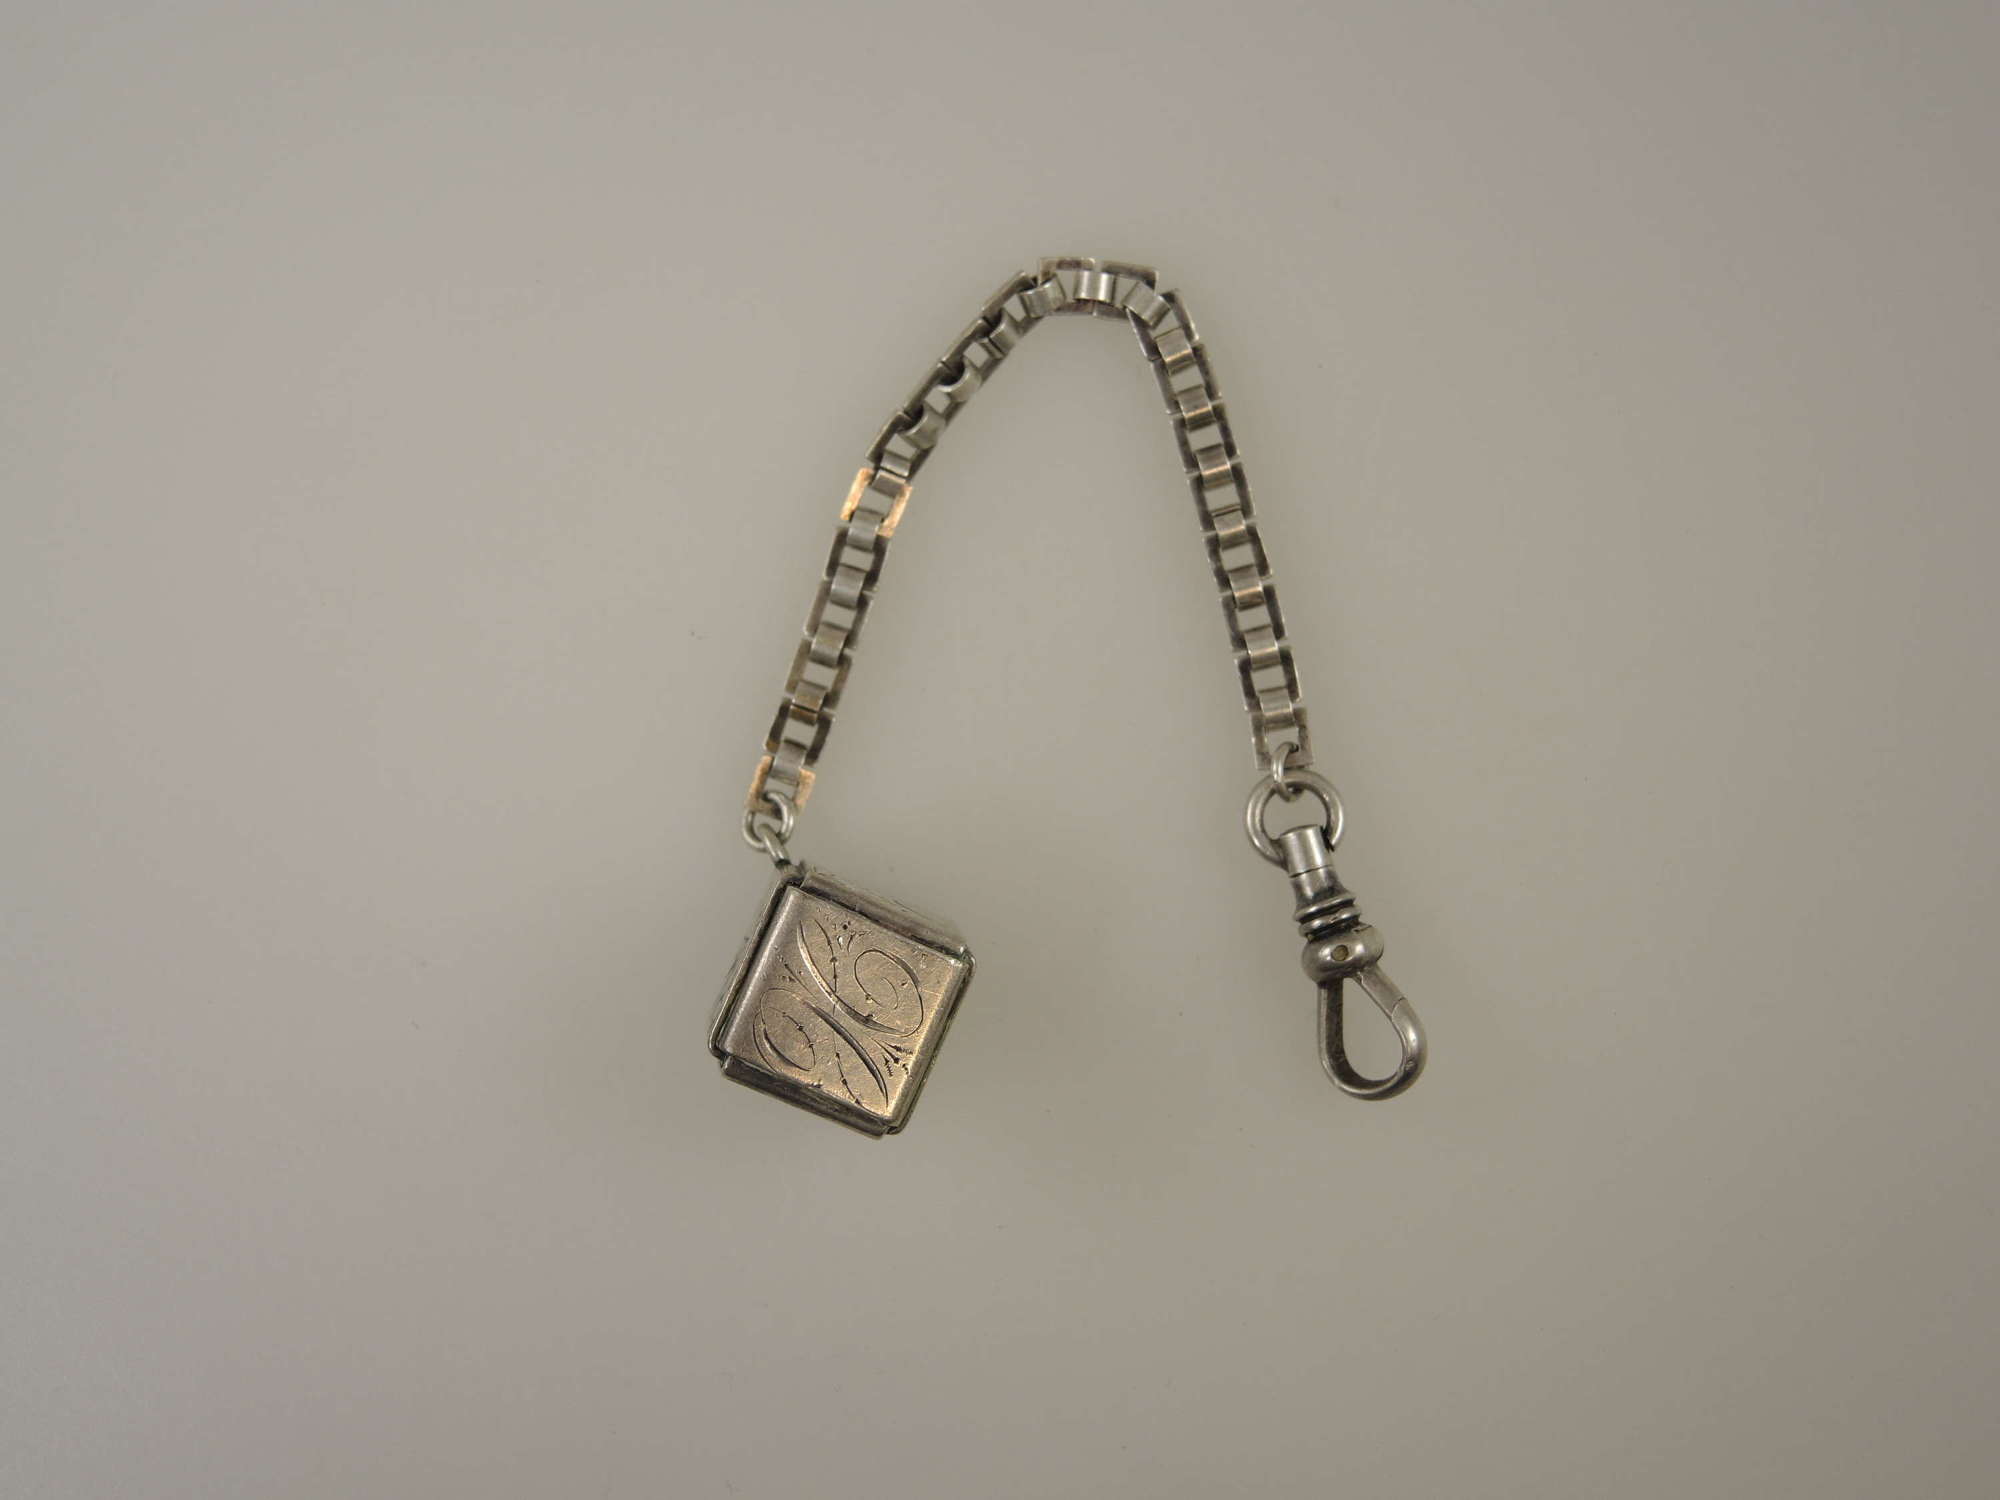 Vintage watch chain with Japanese themed cubed fob c1910